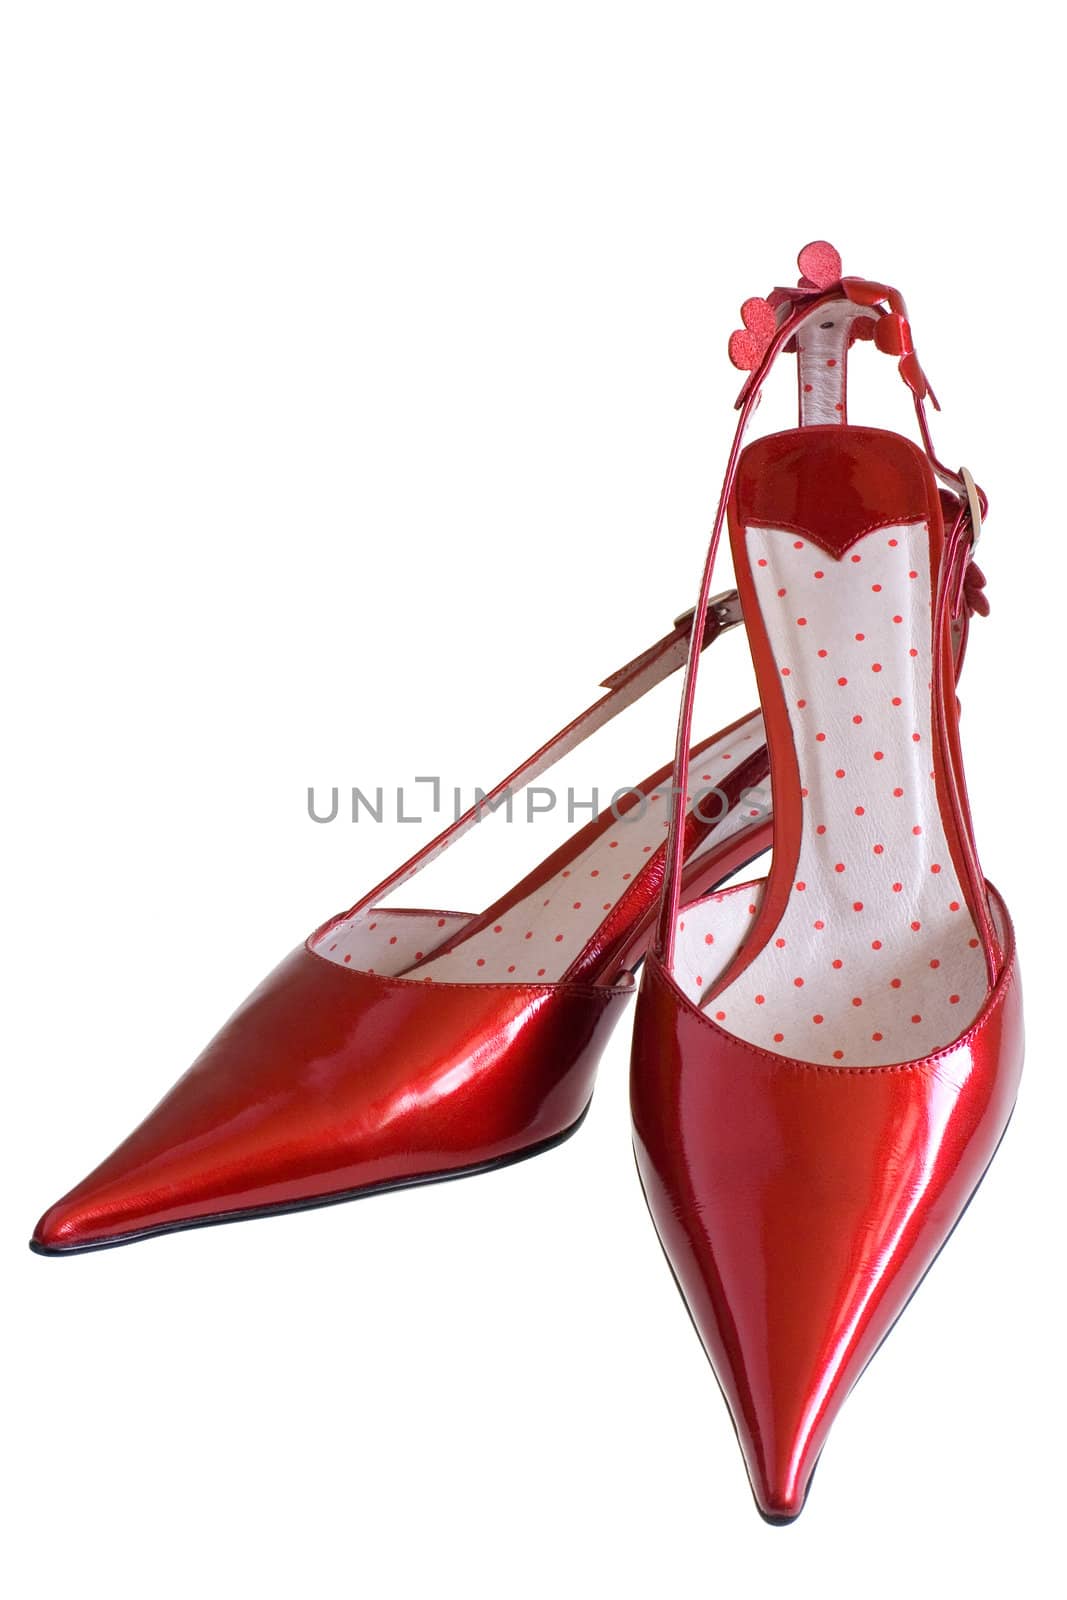 Red patent-leather shoes by Sergius